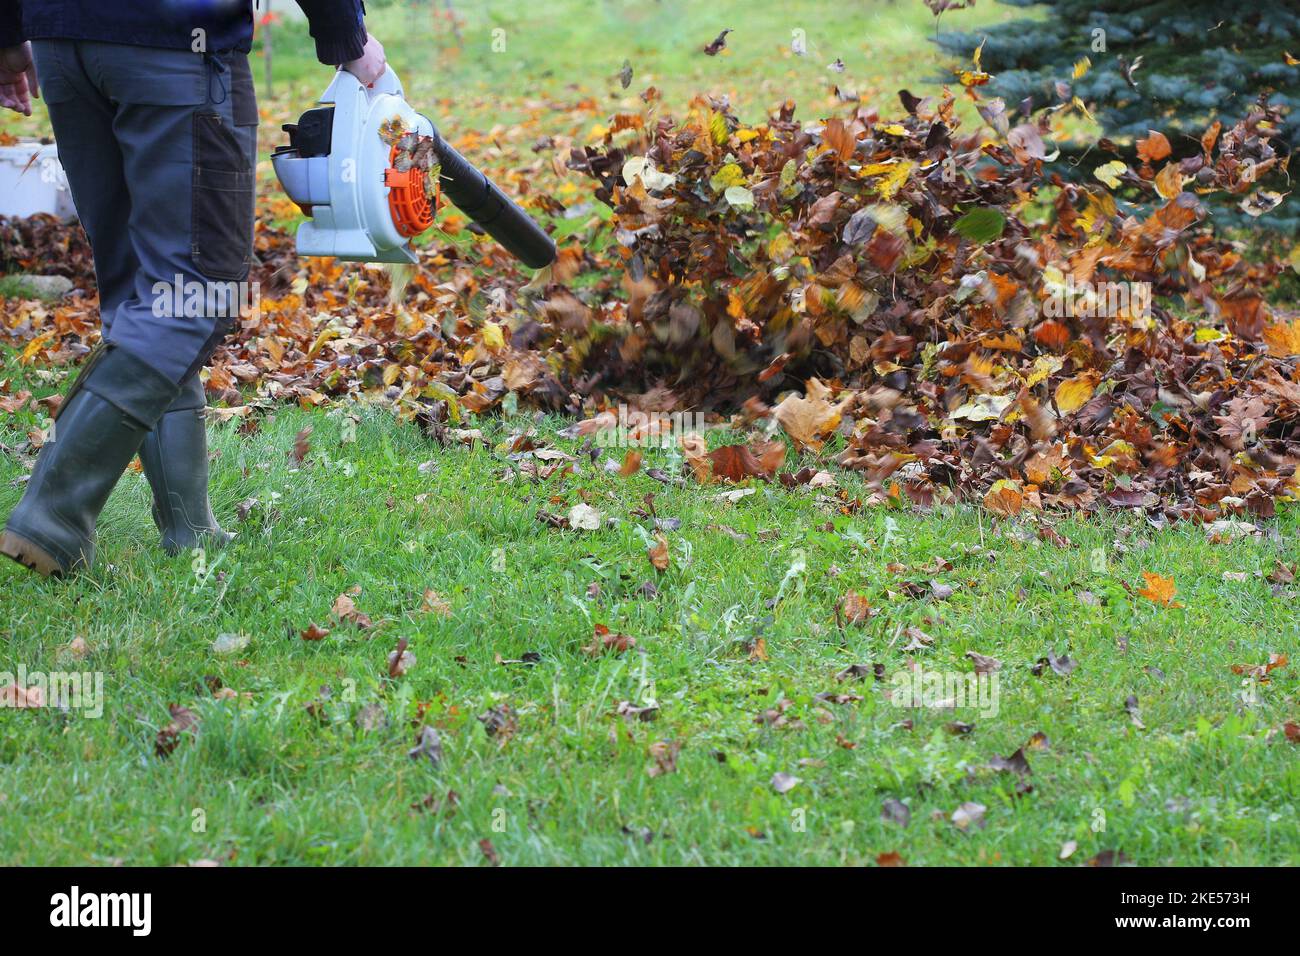 Worker cleaning falling leaves in autumn park. Man using leaf blower for cleaning autumn leaves. Autumn season. Park cleaning service. Stock Photo